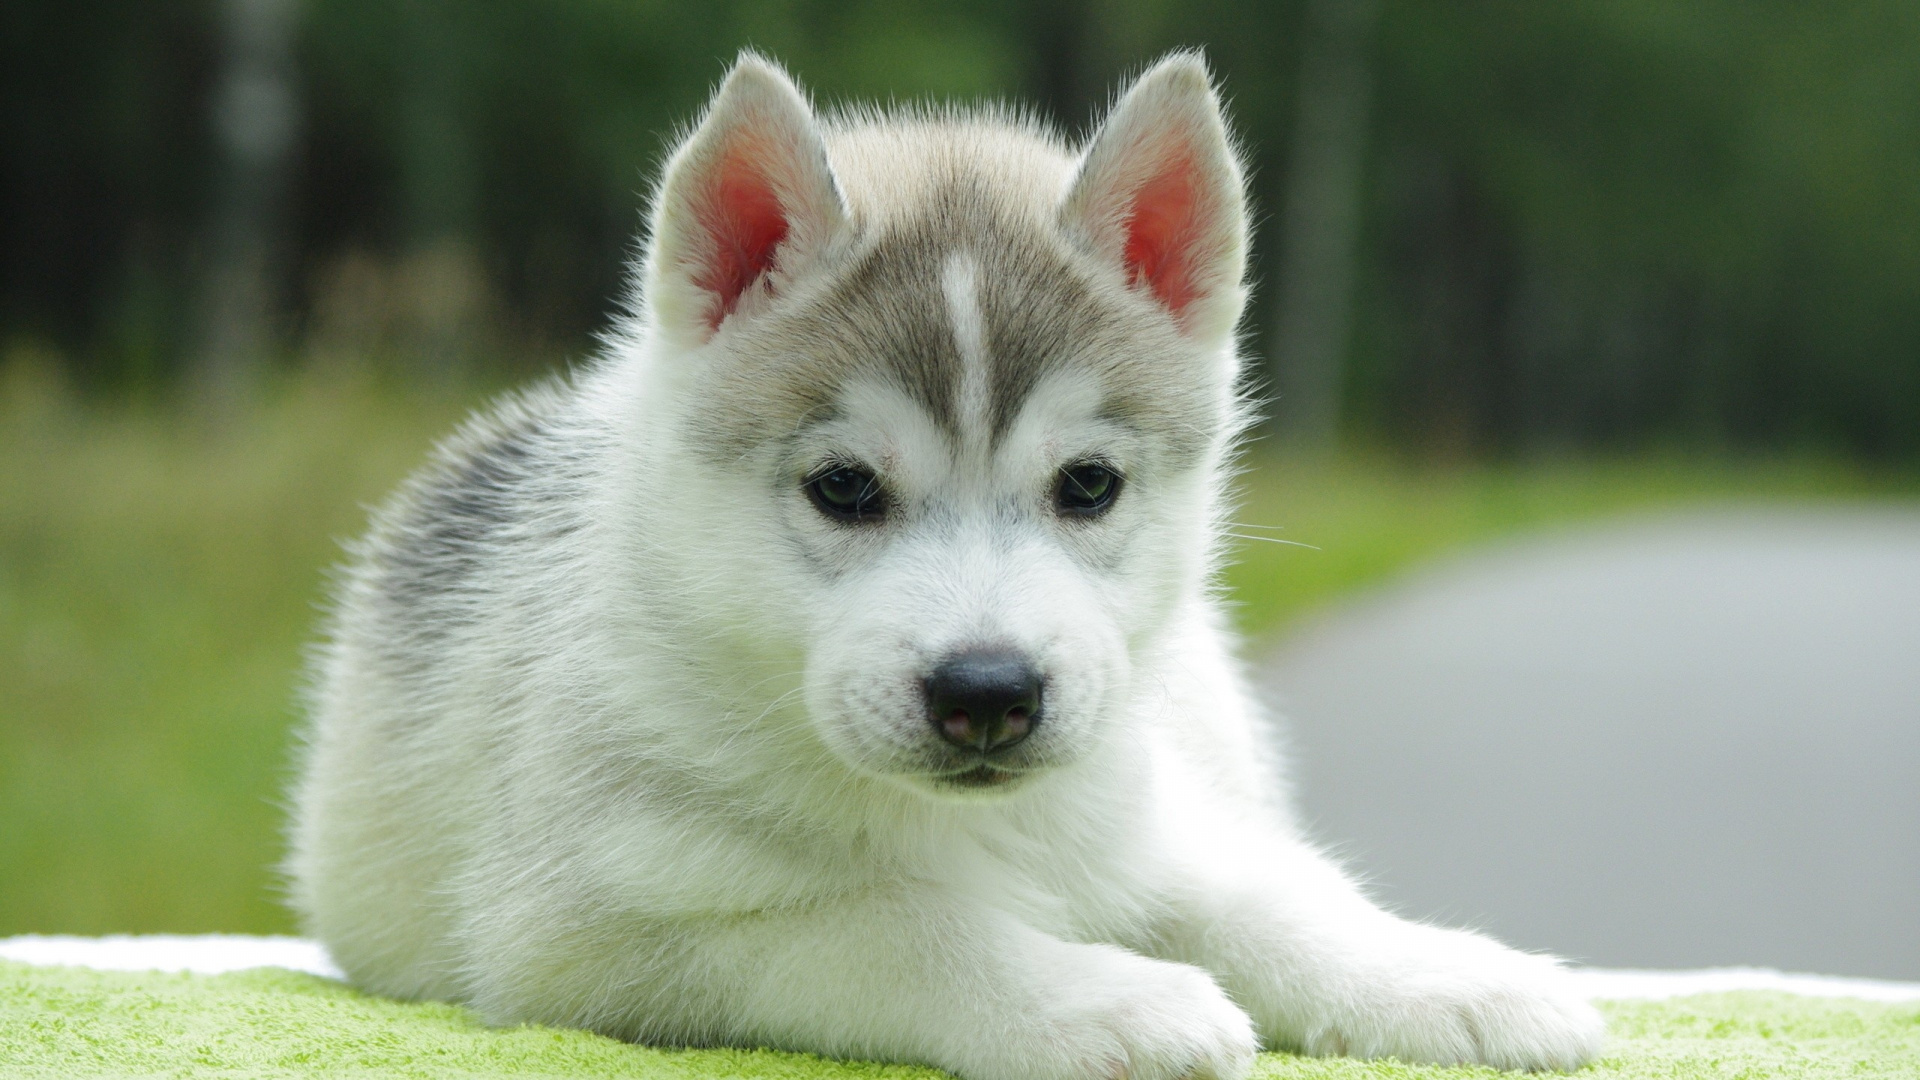 White and Black Siberian Husky Puppy on Green Grass During Daytime. Wallpaper in 1920x1080 Resolution